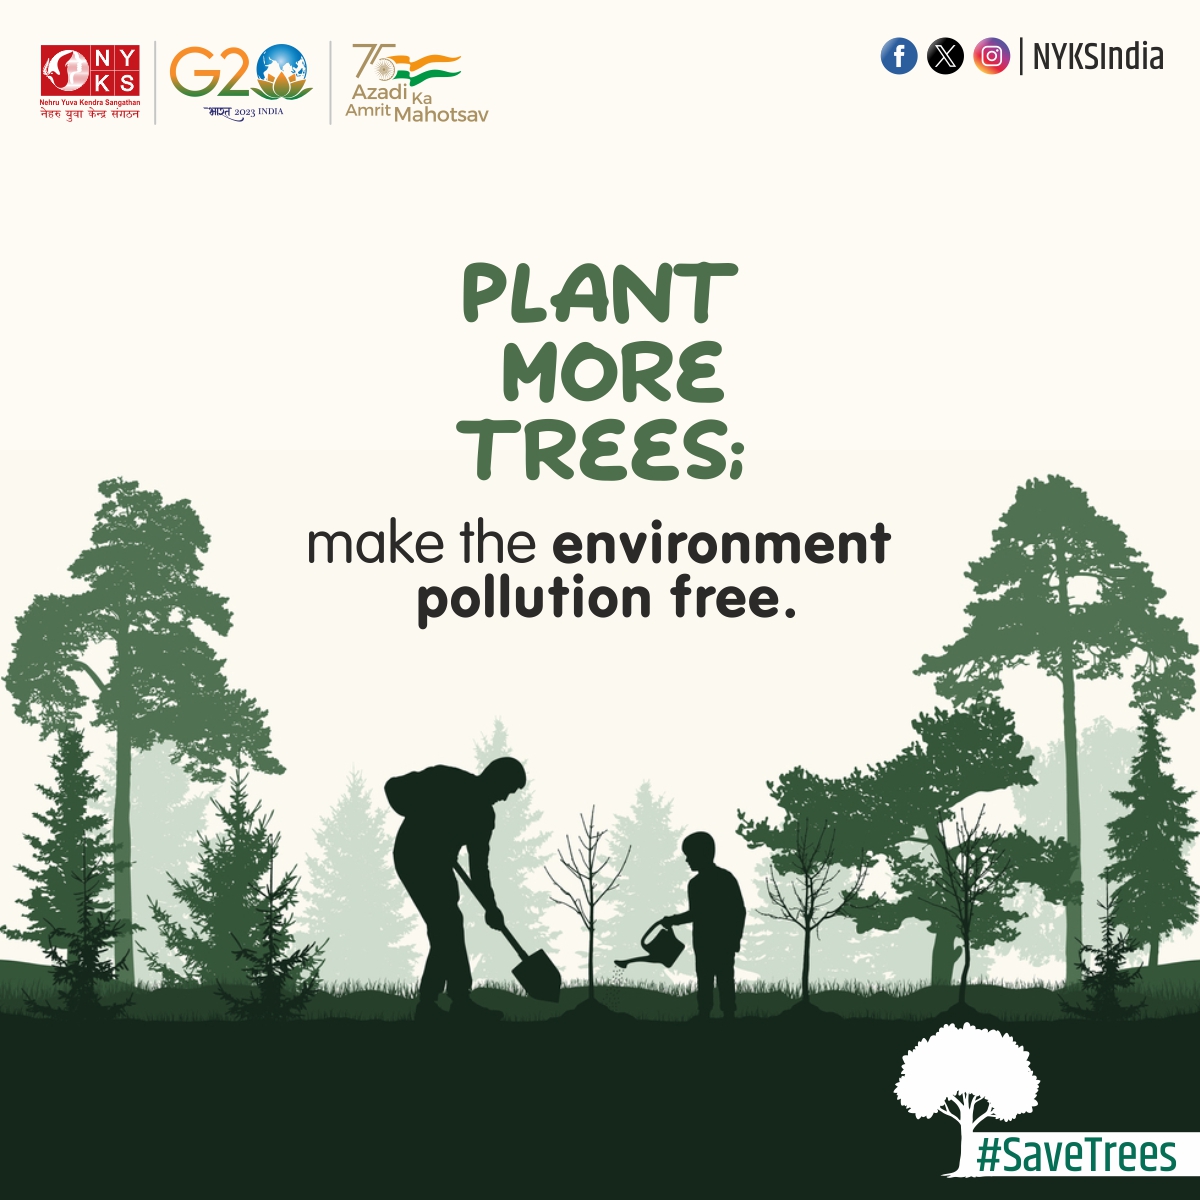 We need to plant more trees so that the environment will be free of pollution.

#PlantTree #SaveEnvironment #PollutionFreeIndia #NYKS #India